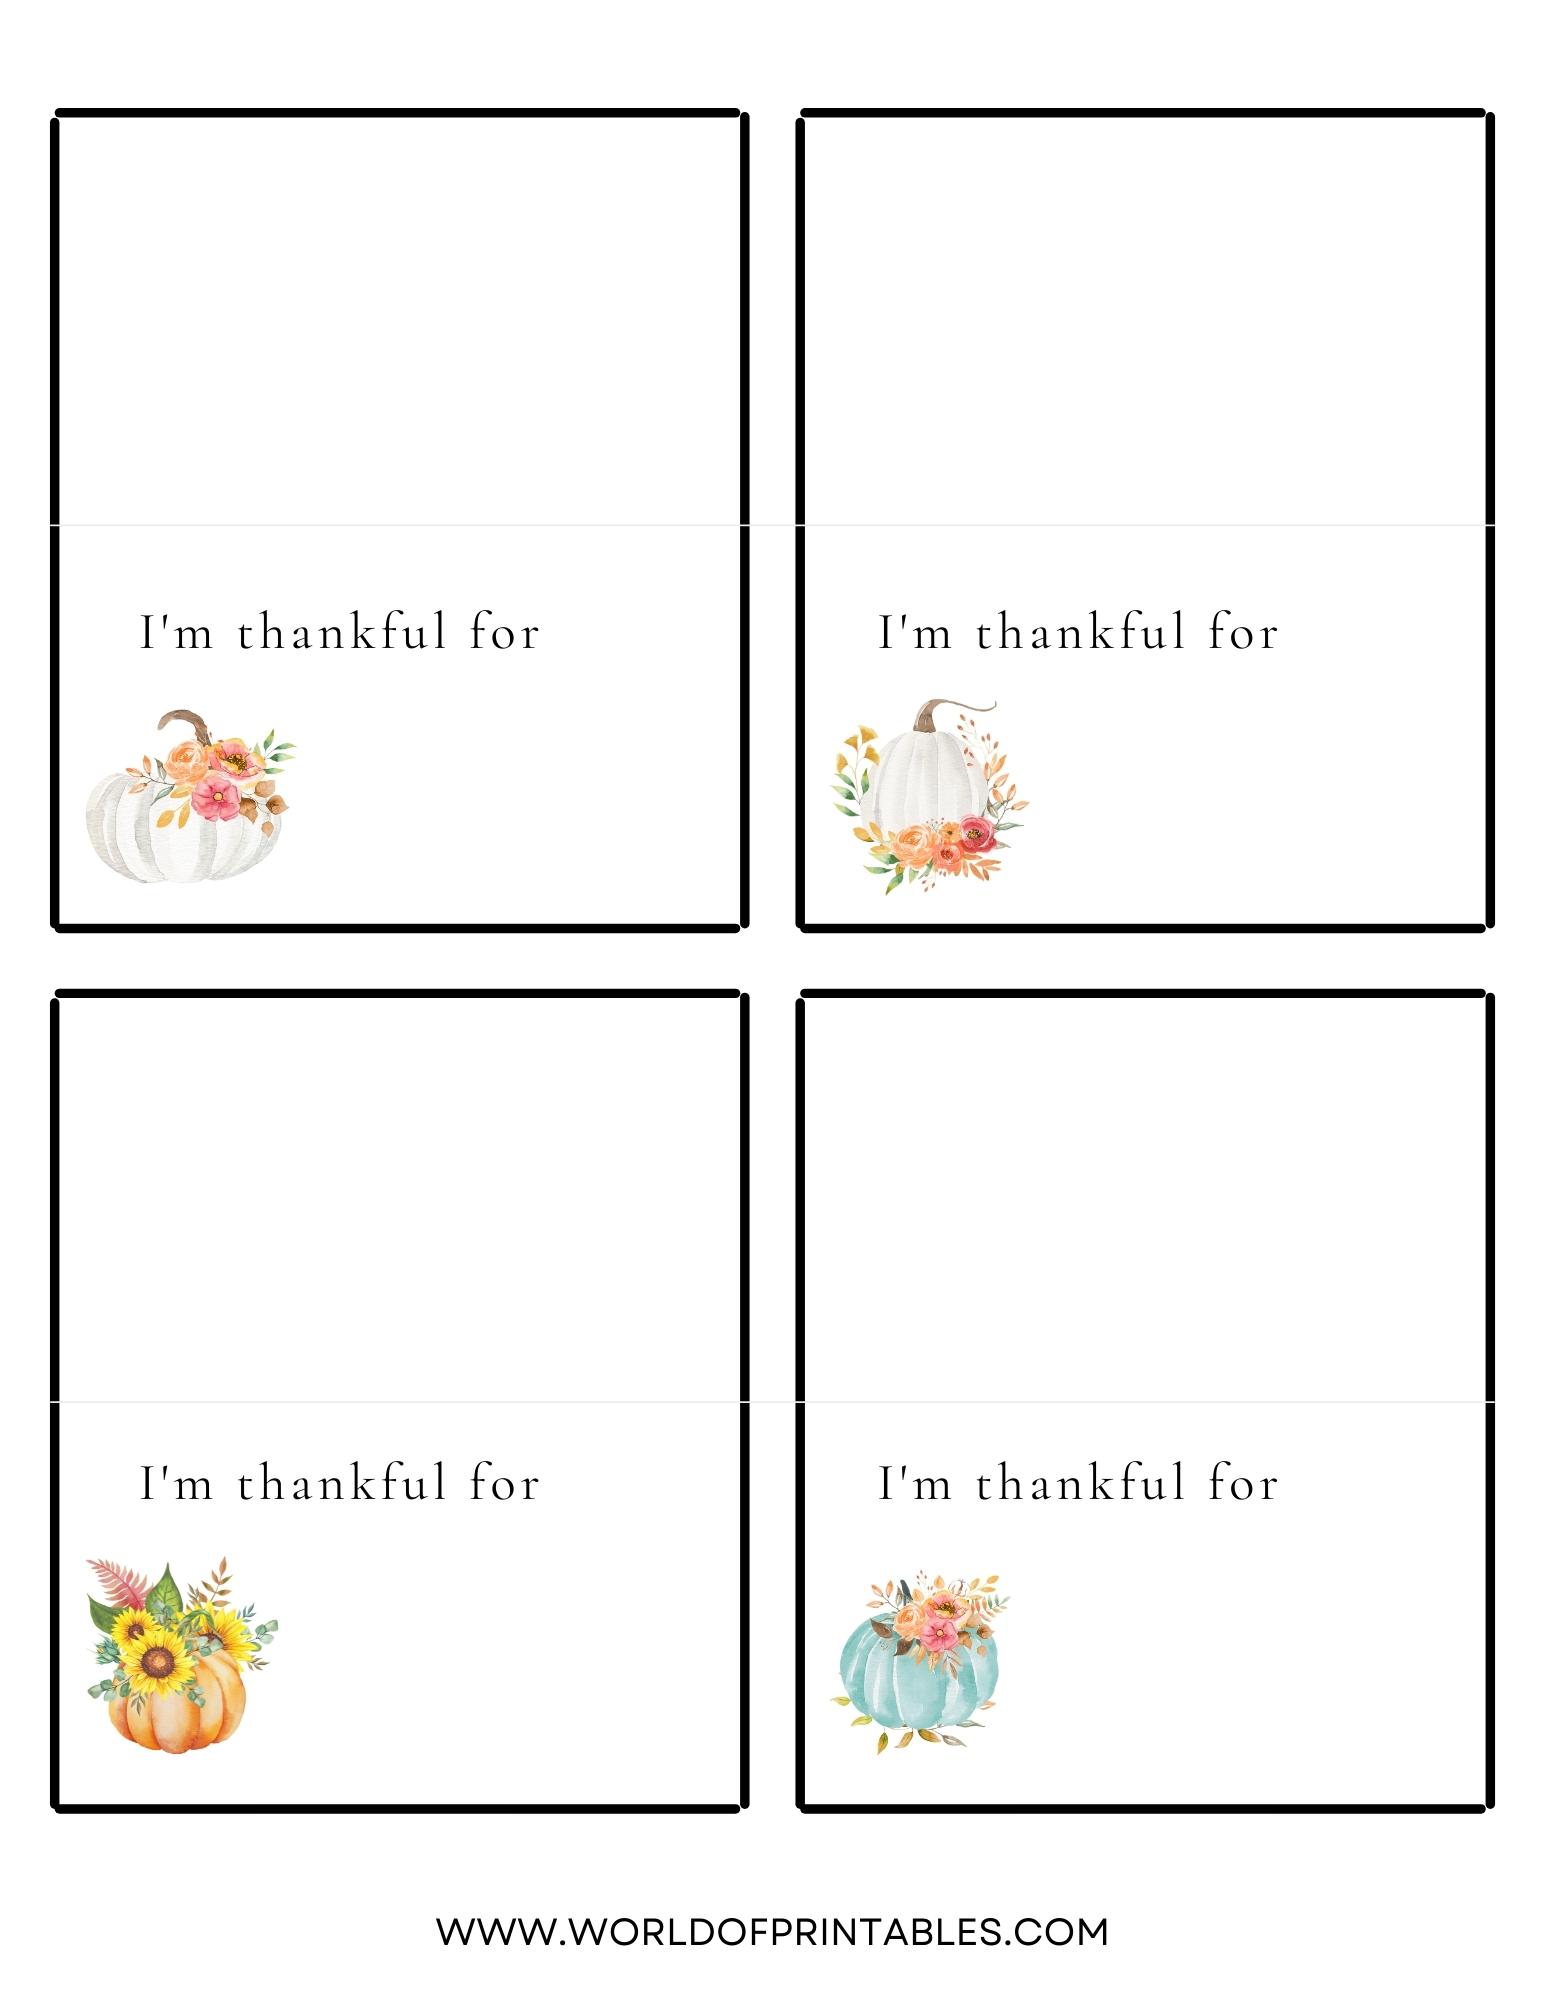 Thanksgiving Place Cards  Free Printables - Just Customize & Print! For Thanksgiving Place Card Templates